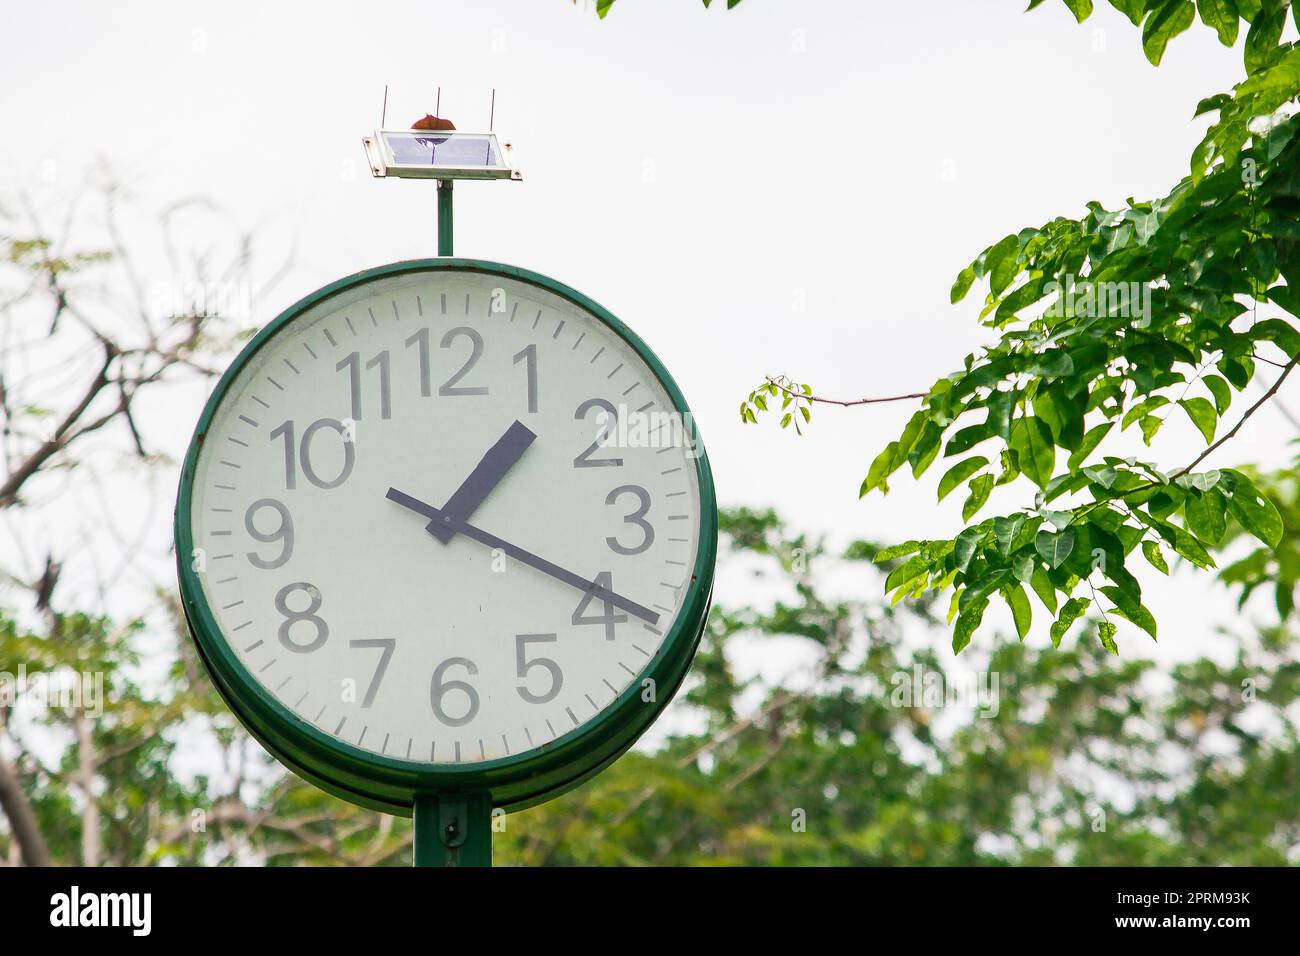 The green clock in the park is powered by the sun. Stock Photo